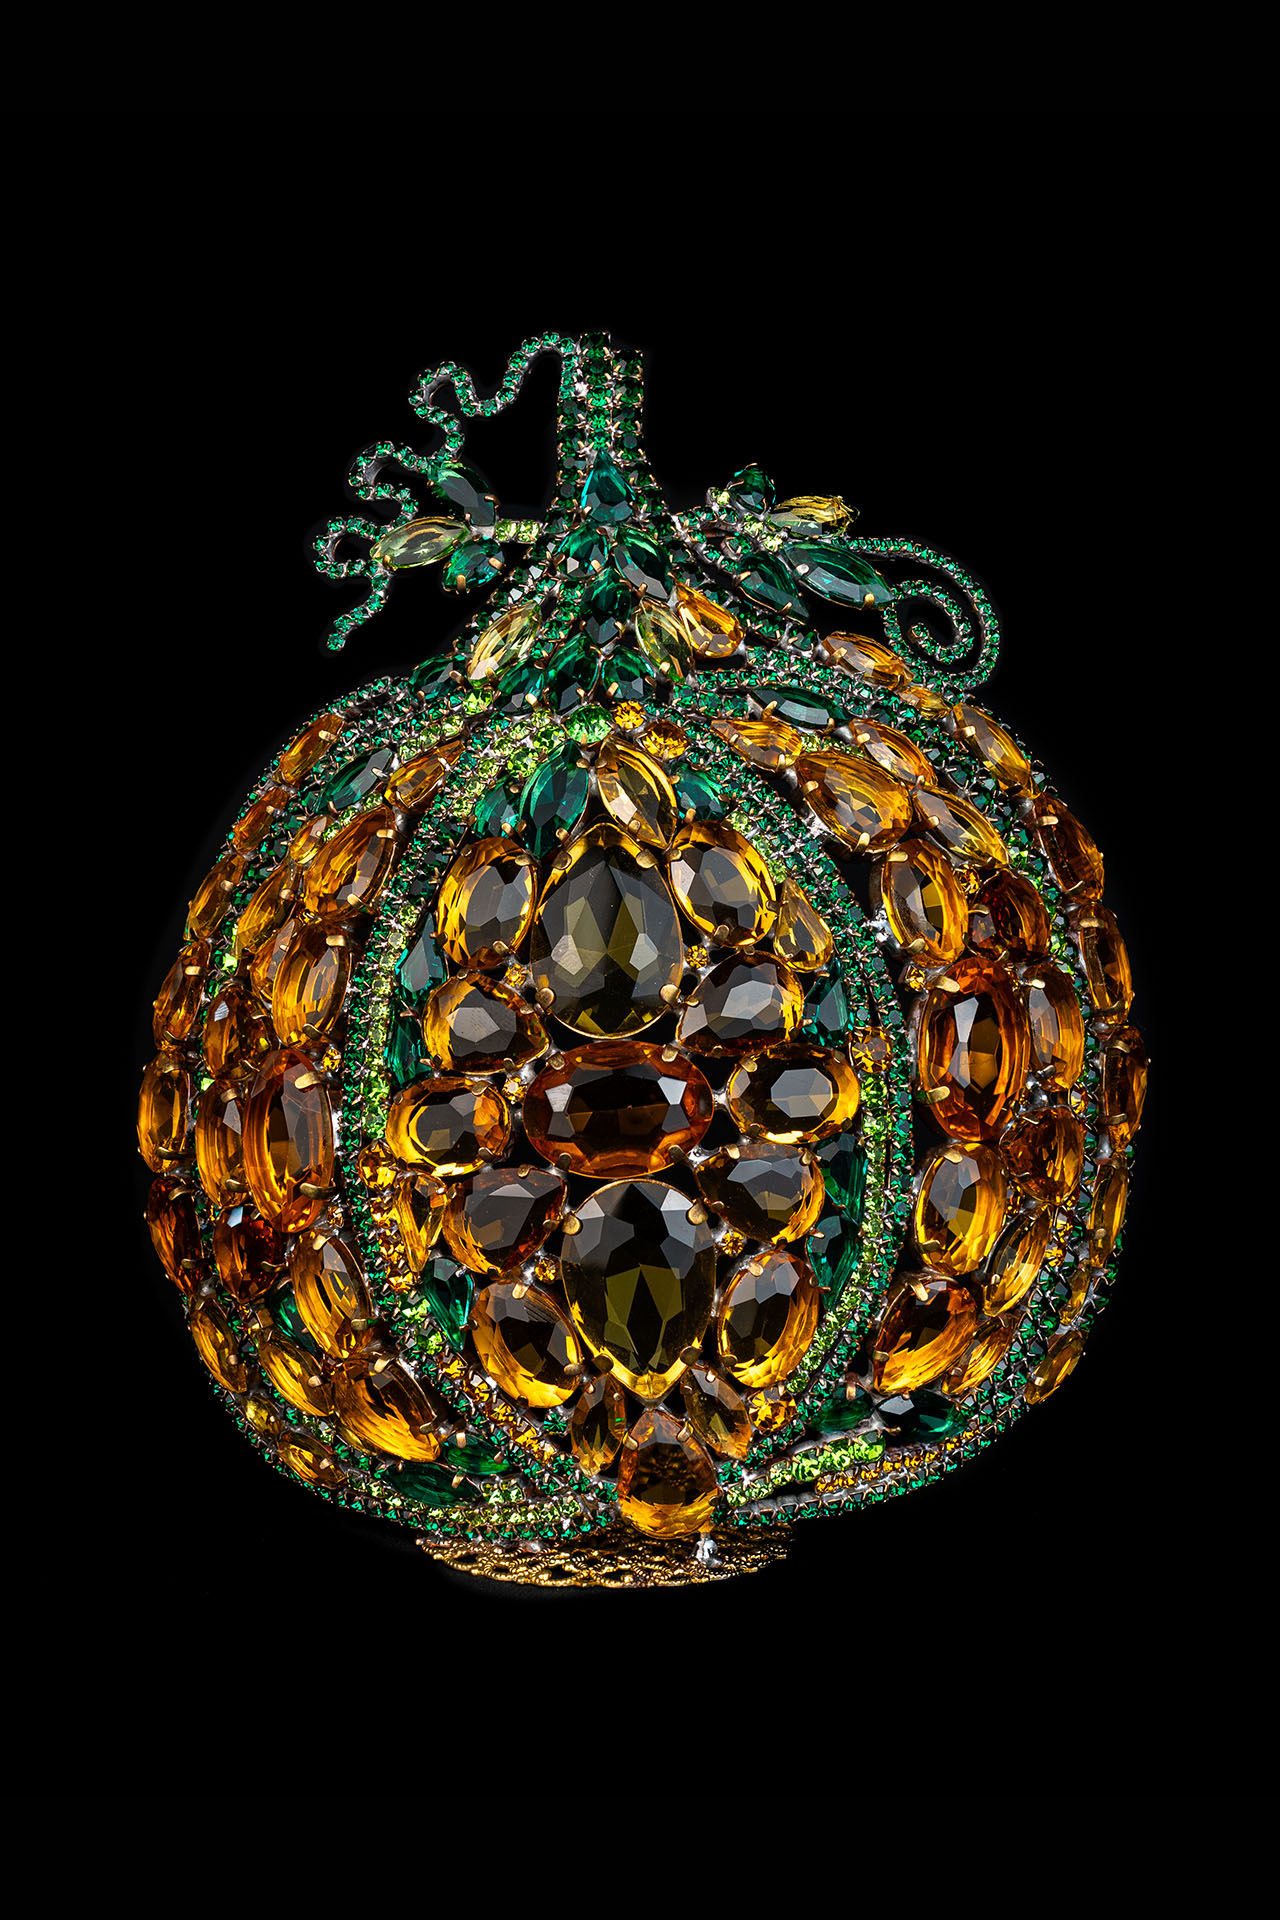 Bedazzled pumpkin decoration adorned with shimmering rhinestones